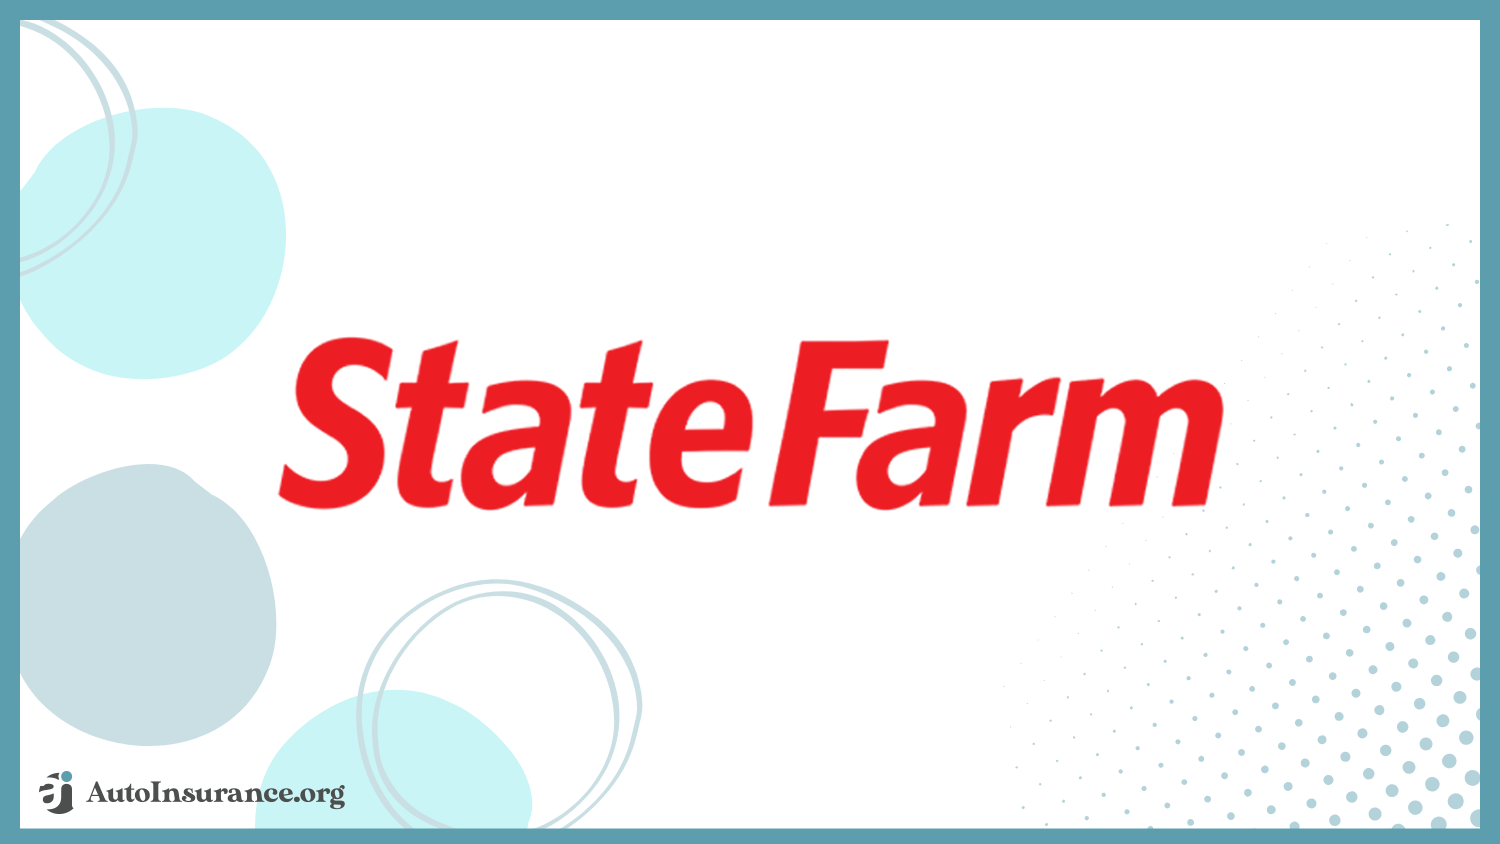 State Farm: Best Auto Insurance for Luxury Cars